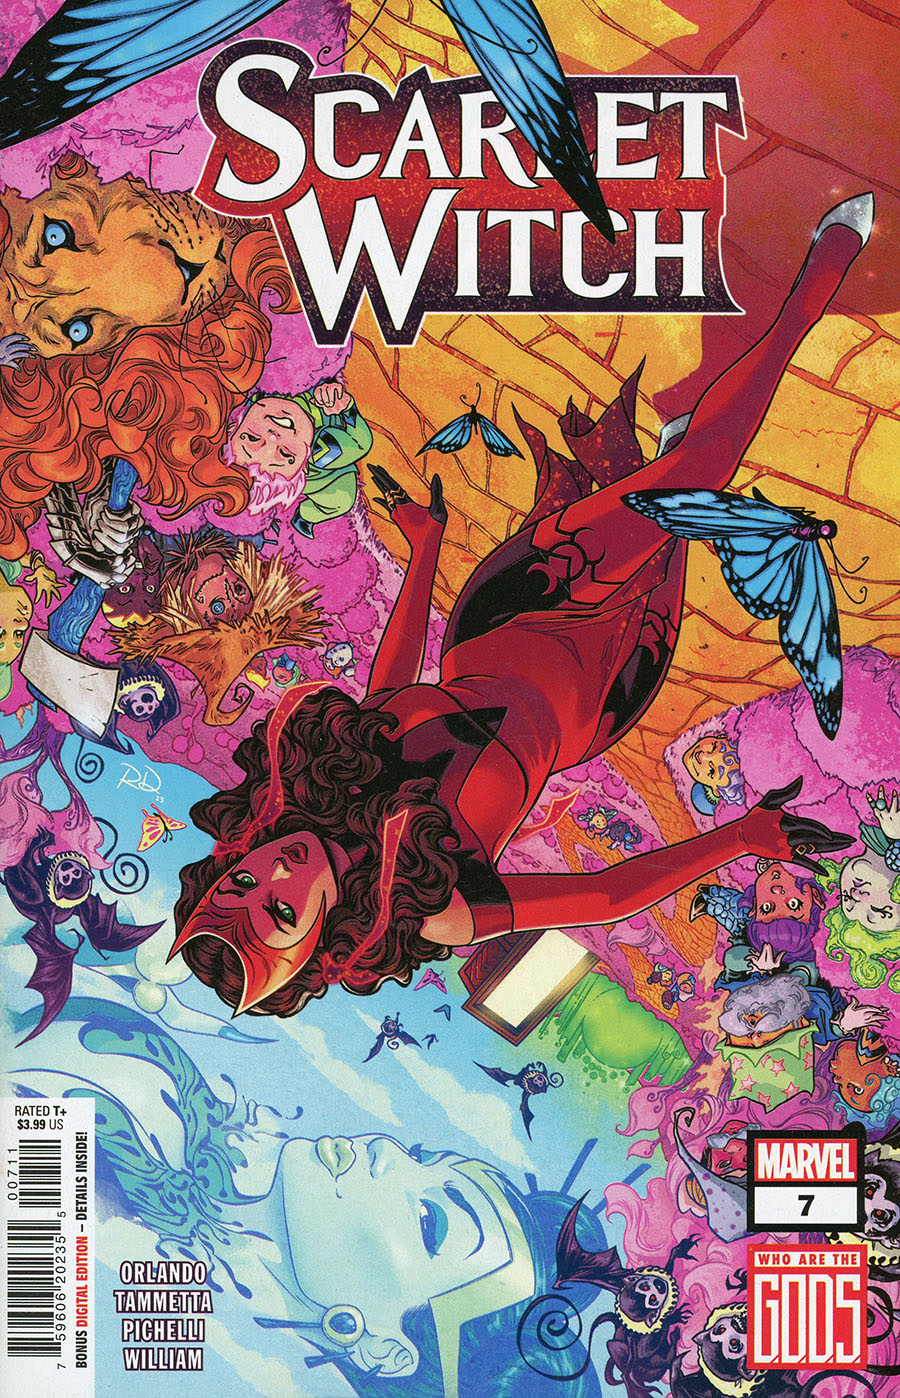 Scarlet Witch Vol 3 #7 Cover A Regular Russell Dauterman Cover (G.O.D.S. Tie-In)